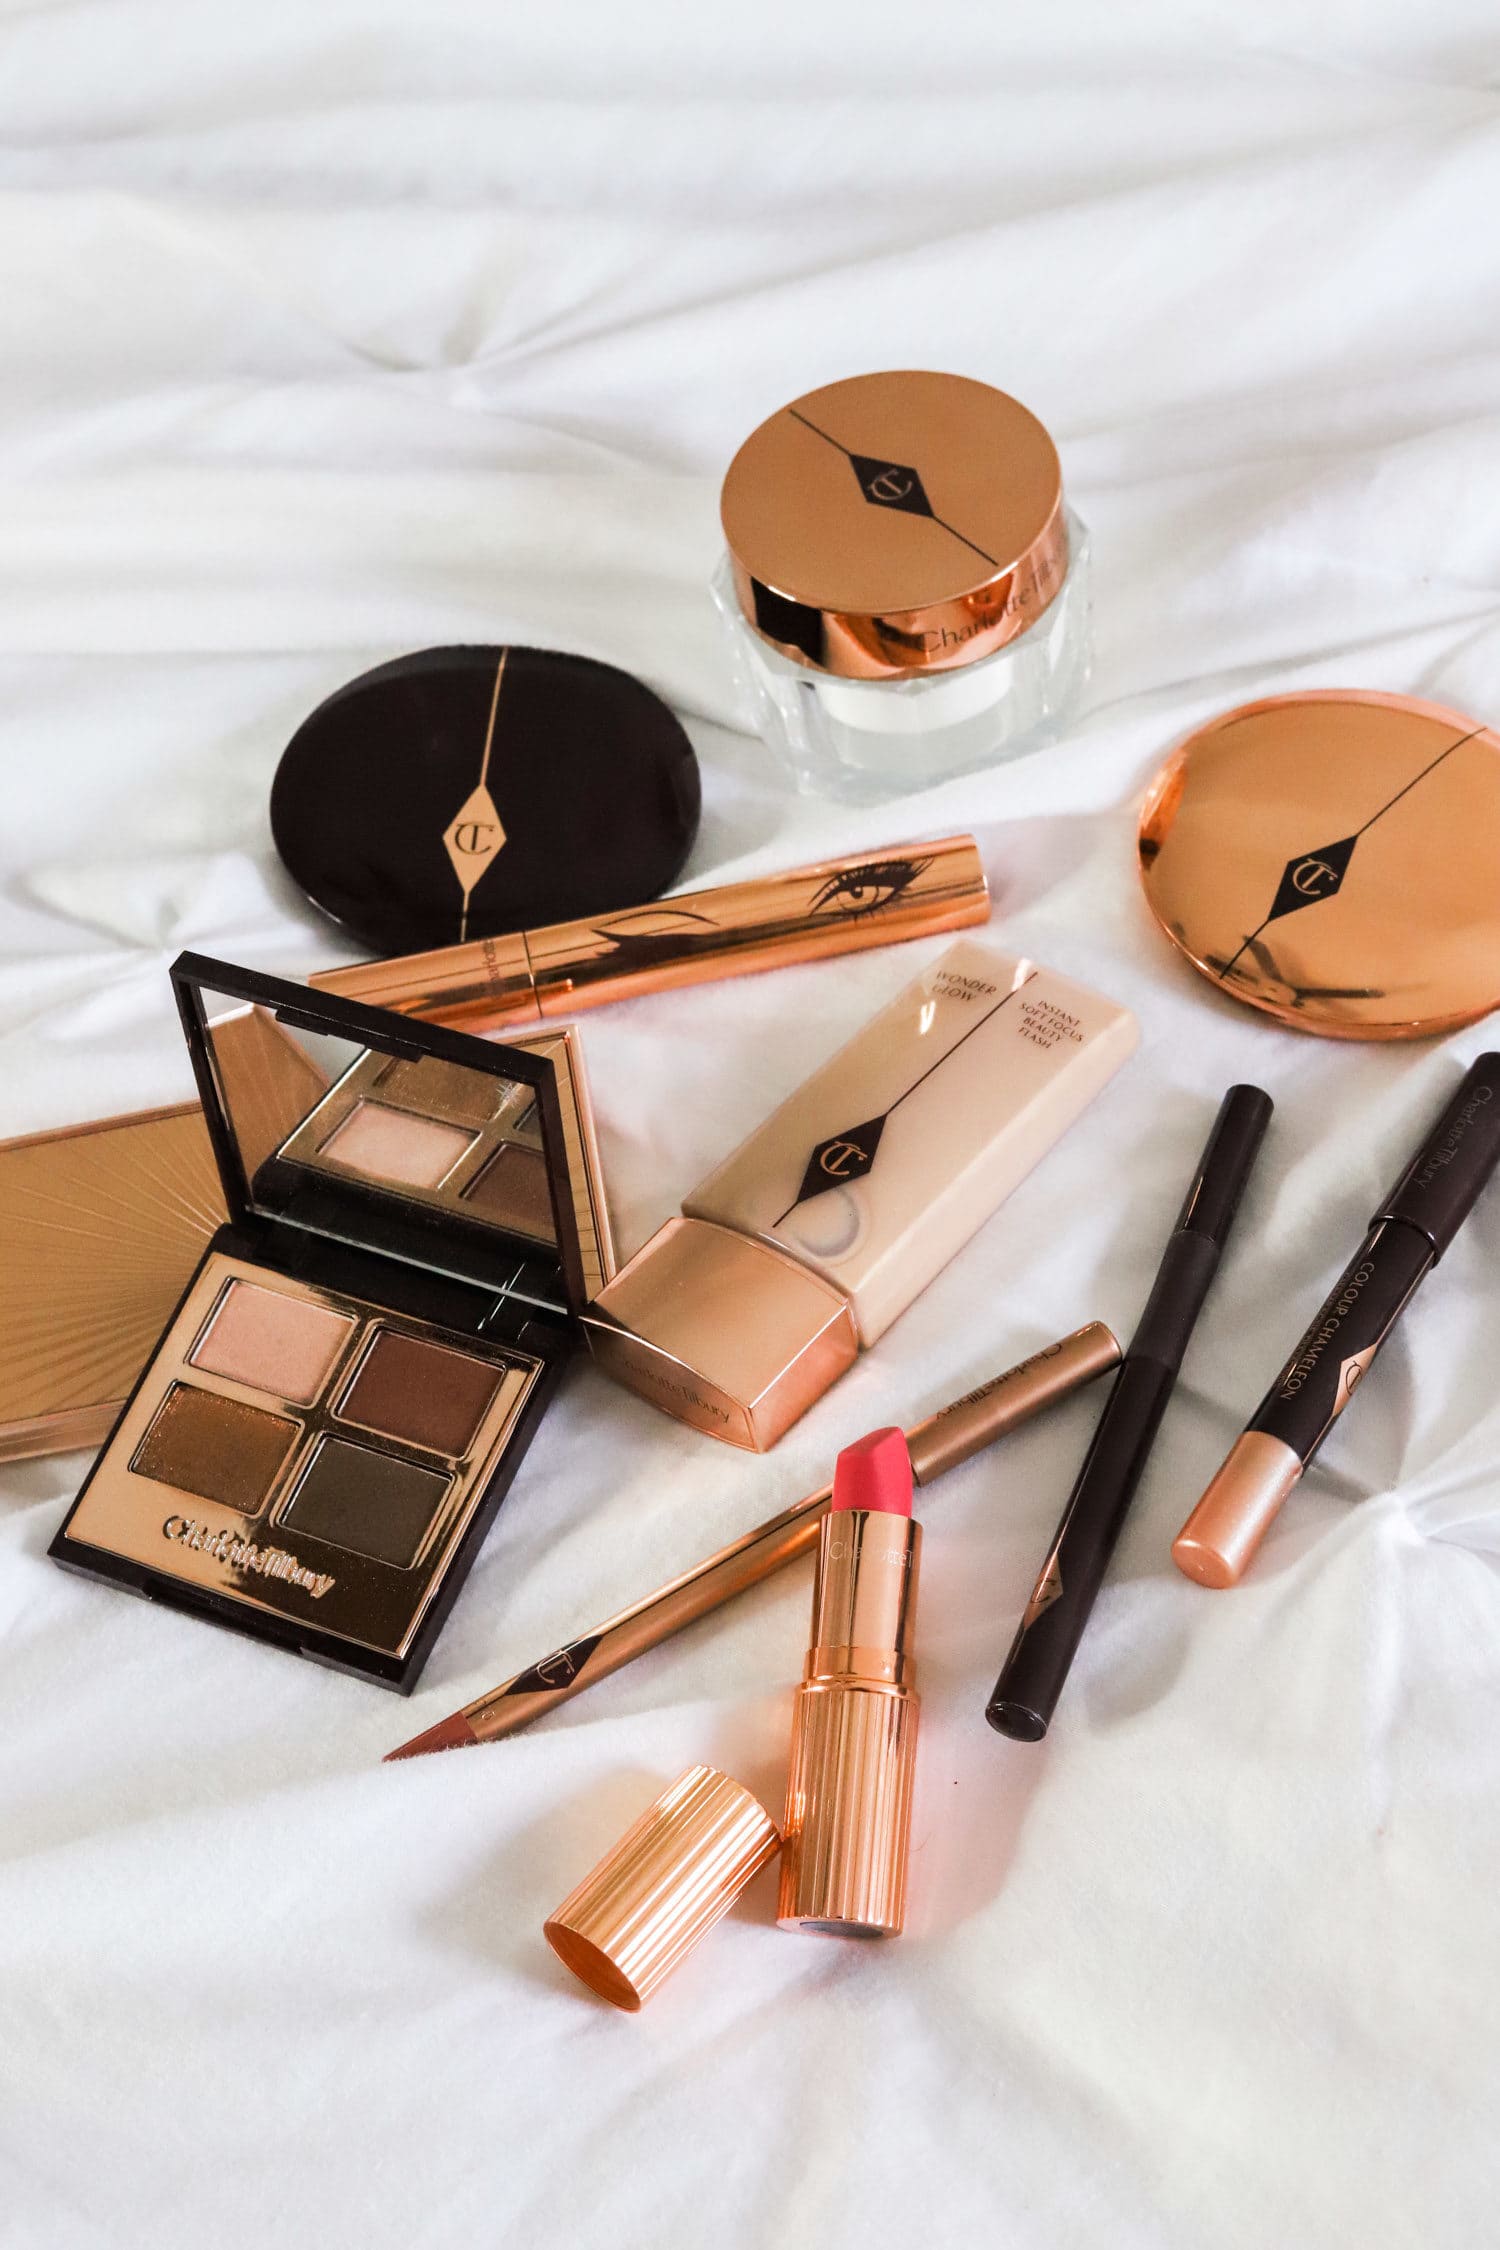 Montgomery Turbine Zeal Charlotte Tilbury Makeup Review: Is It Worth The Hype?